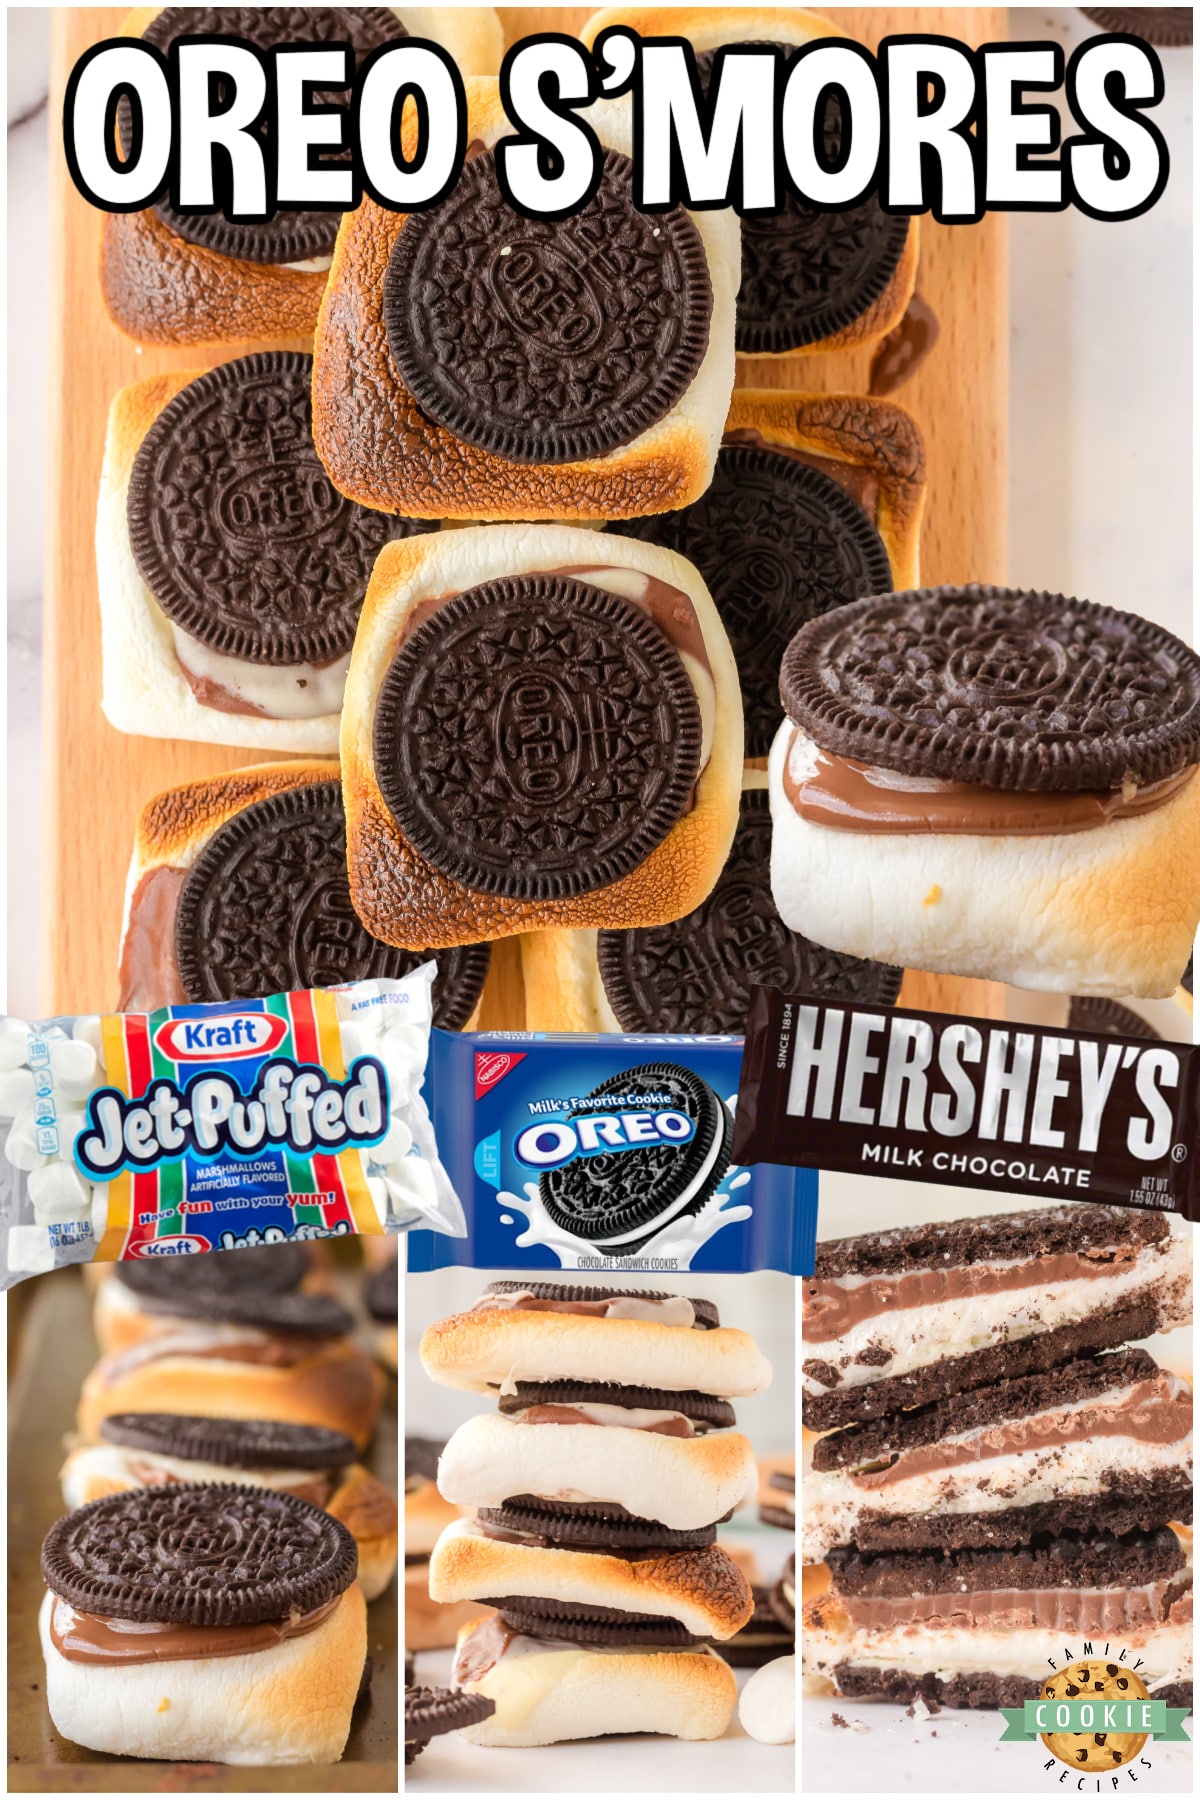 Oreo S’mores are gooey, sweet, crunchy & super chocolatey! These oven baked S’mores are sure to be your new summertime go-to dessert!